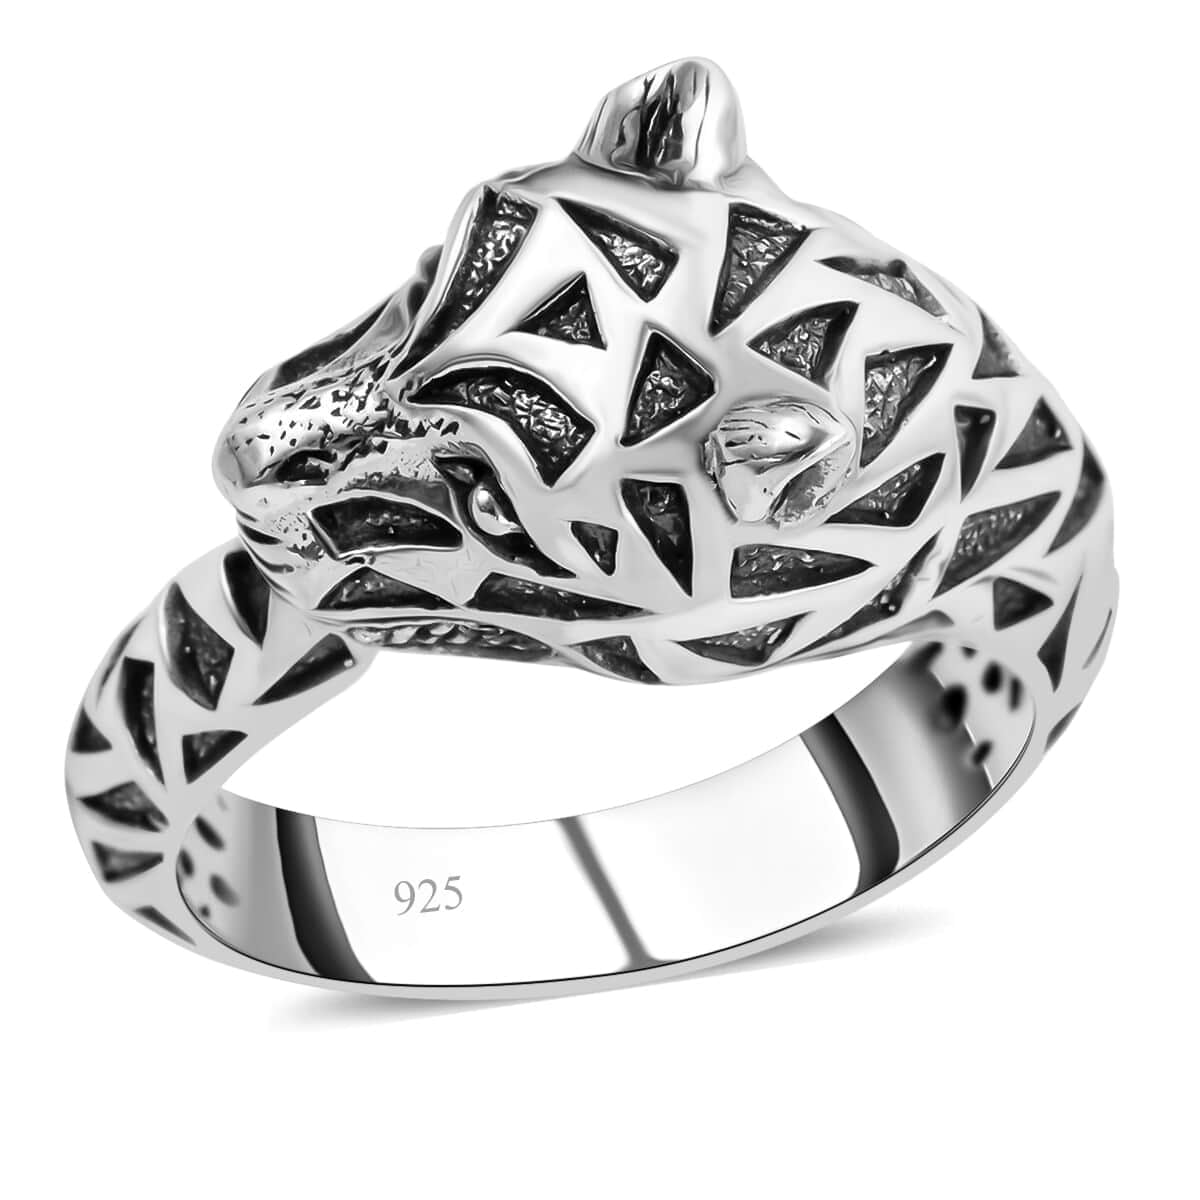 Shop LC BALI LEGACY 925 Sterling Silver Panther Ring for Women Size 8 9 Grams Birthday Gifts for Women f989e5ae 1bb8 4e8d aaf6 8a8409a62a99.b191ec16aa1afbe673638aee512f9f28